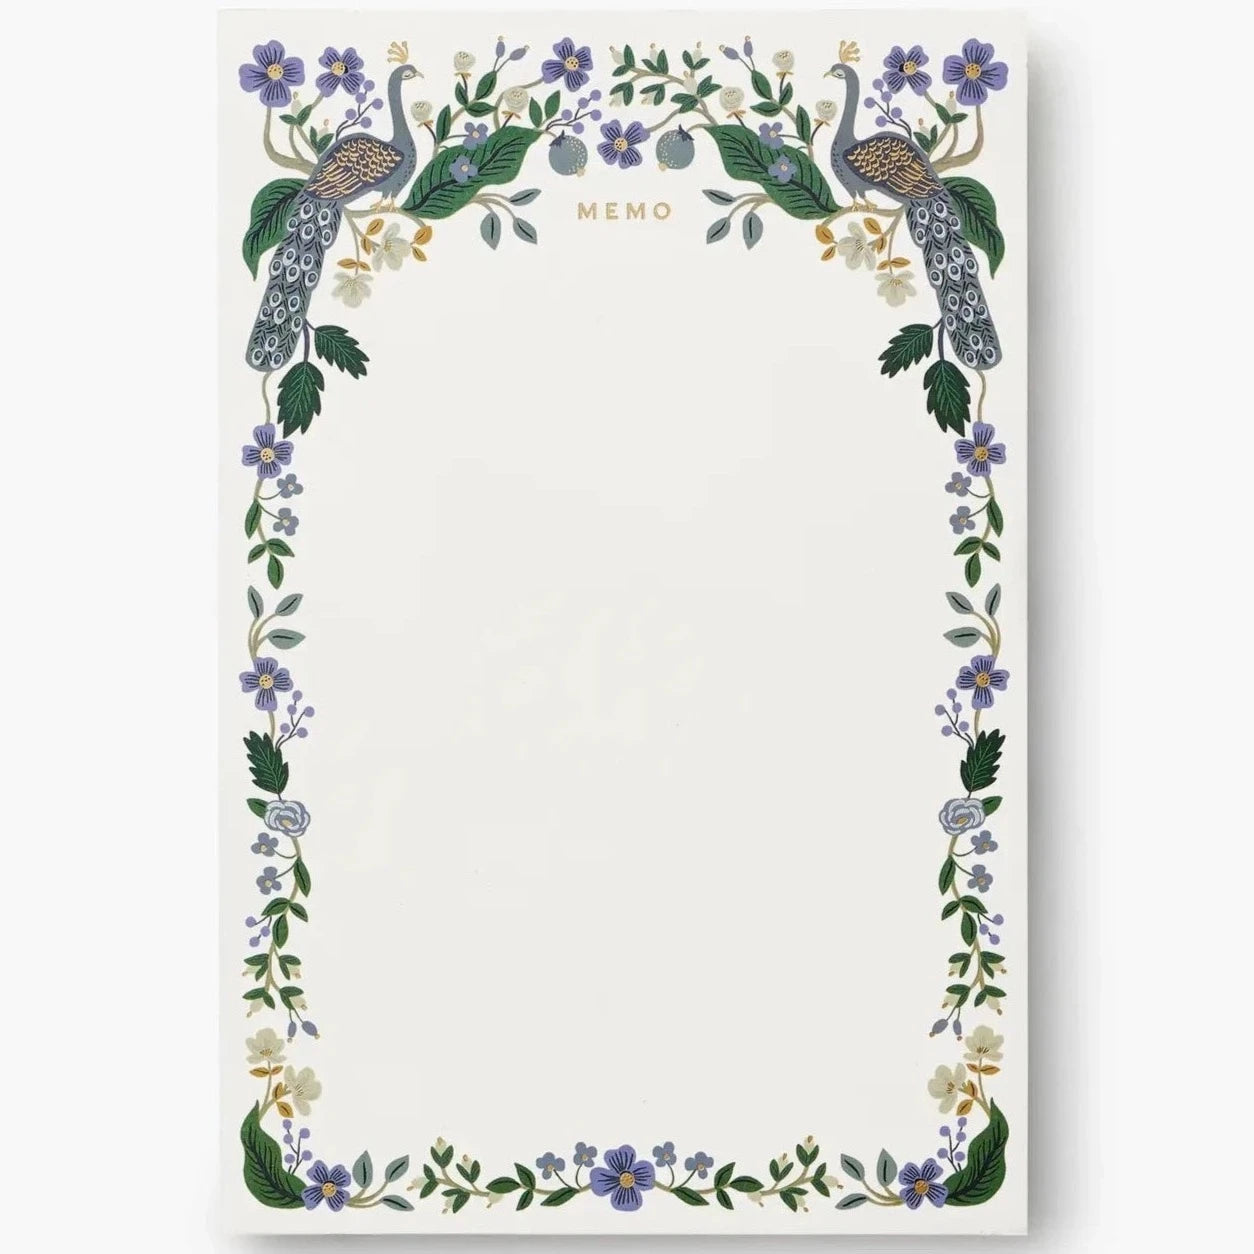 white memo pad with the word &quot;memo&quot; printed in gold foil at the top. Around the borders of the page are blue peacocks and blue flowers with greenery